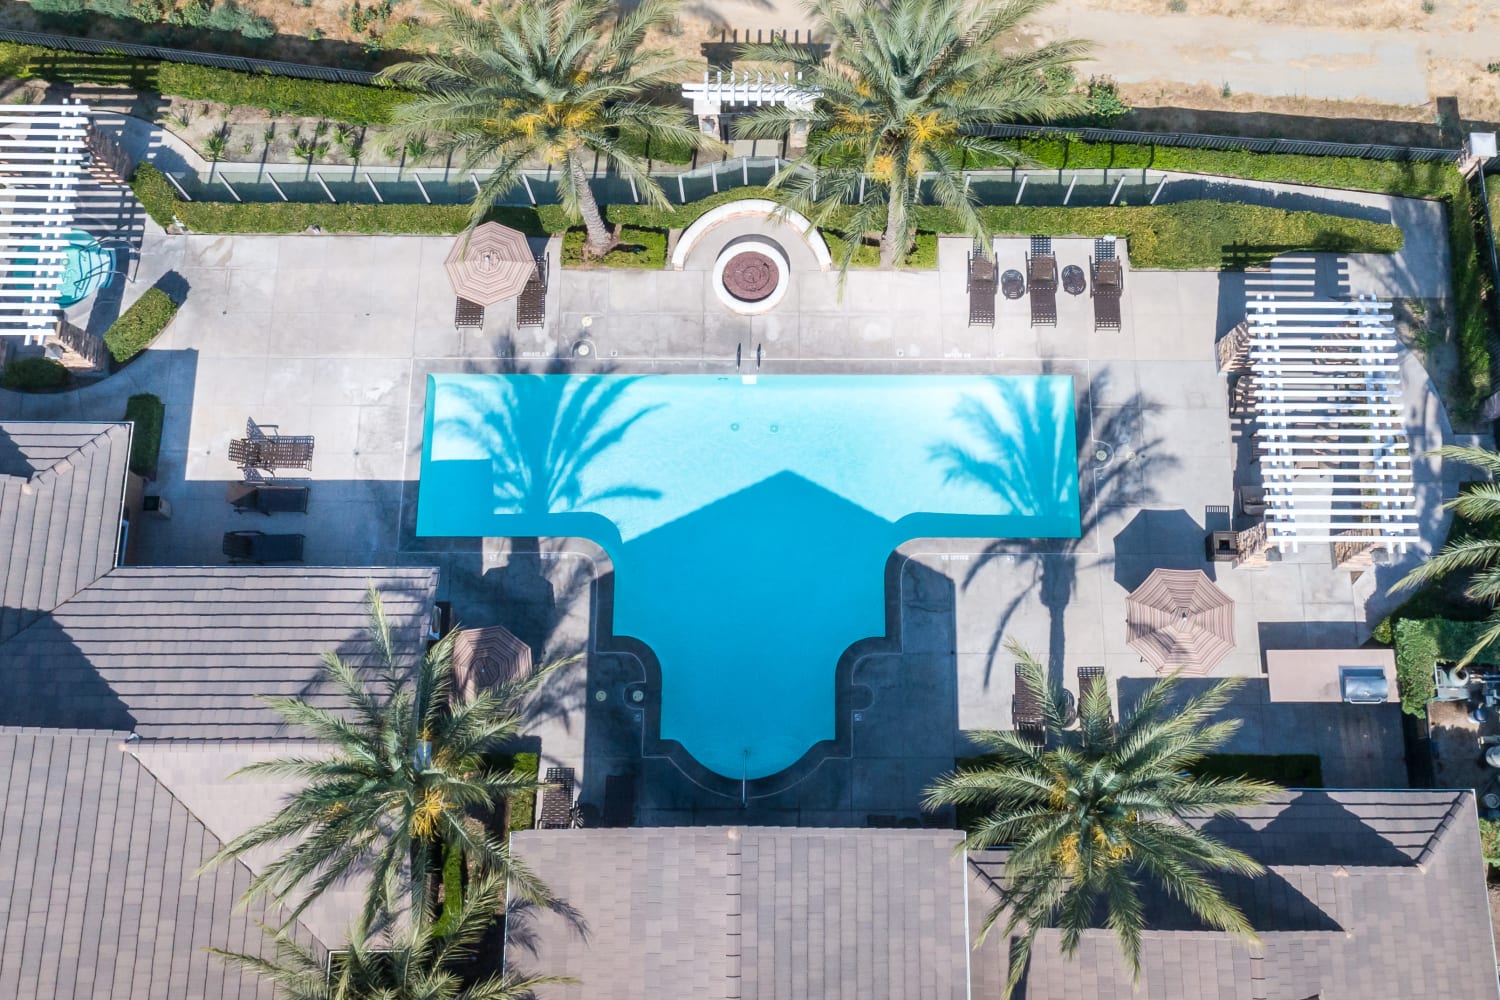 Luxurious swimming pool at The Village on 5th in Rancho Cucamonga, California